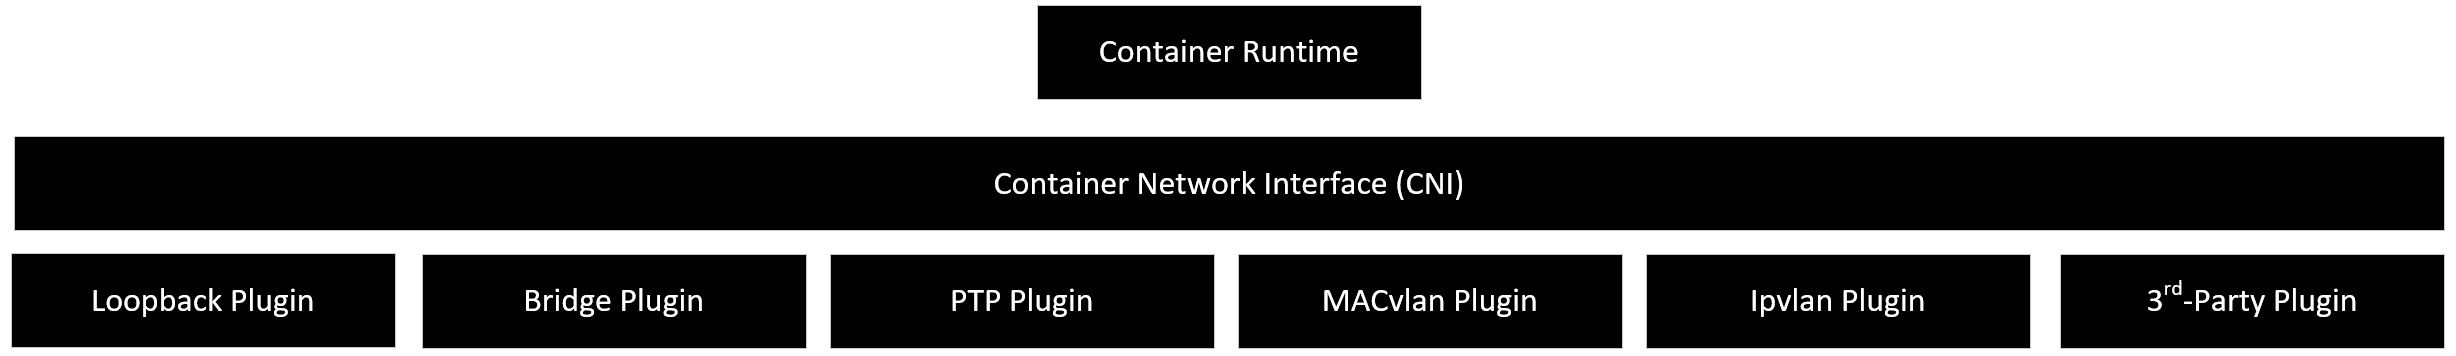 Container Network Interface (CNI) Integration